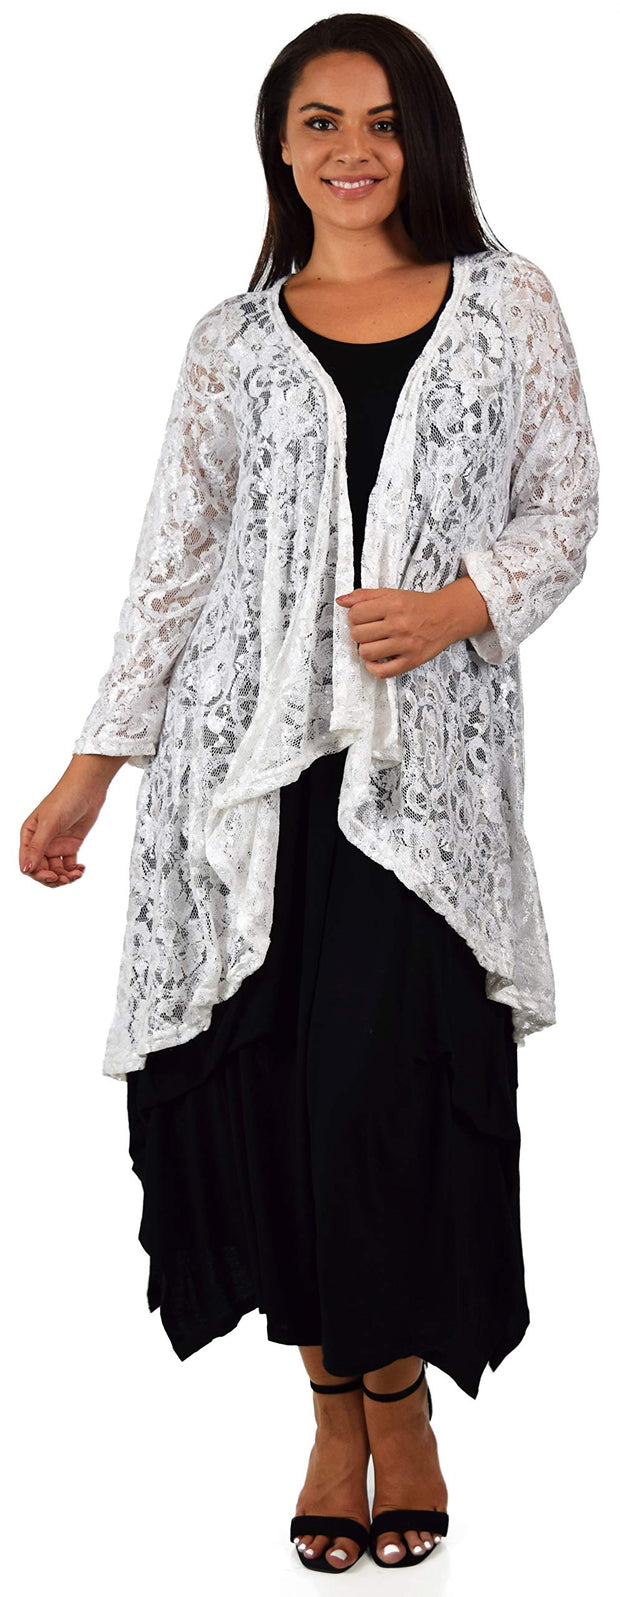 Dare2bStylish Women Plus Size High Low Open Front Lace Duster Cardigan Jacket